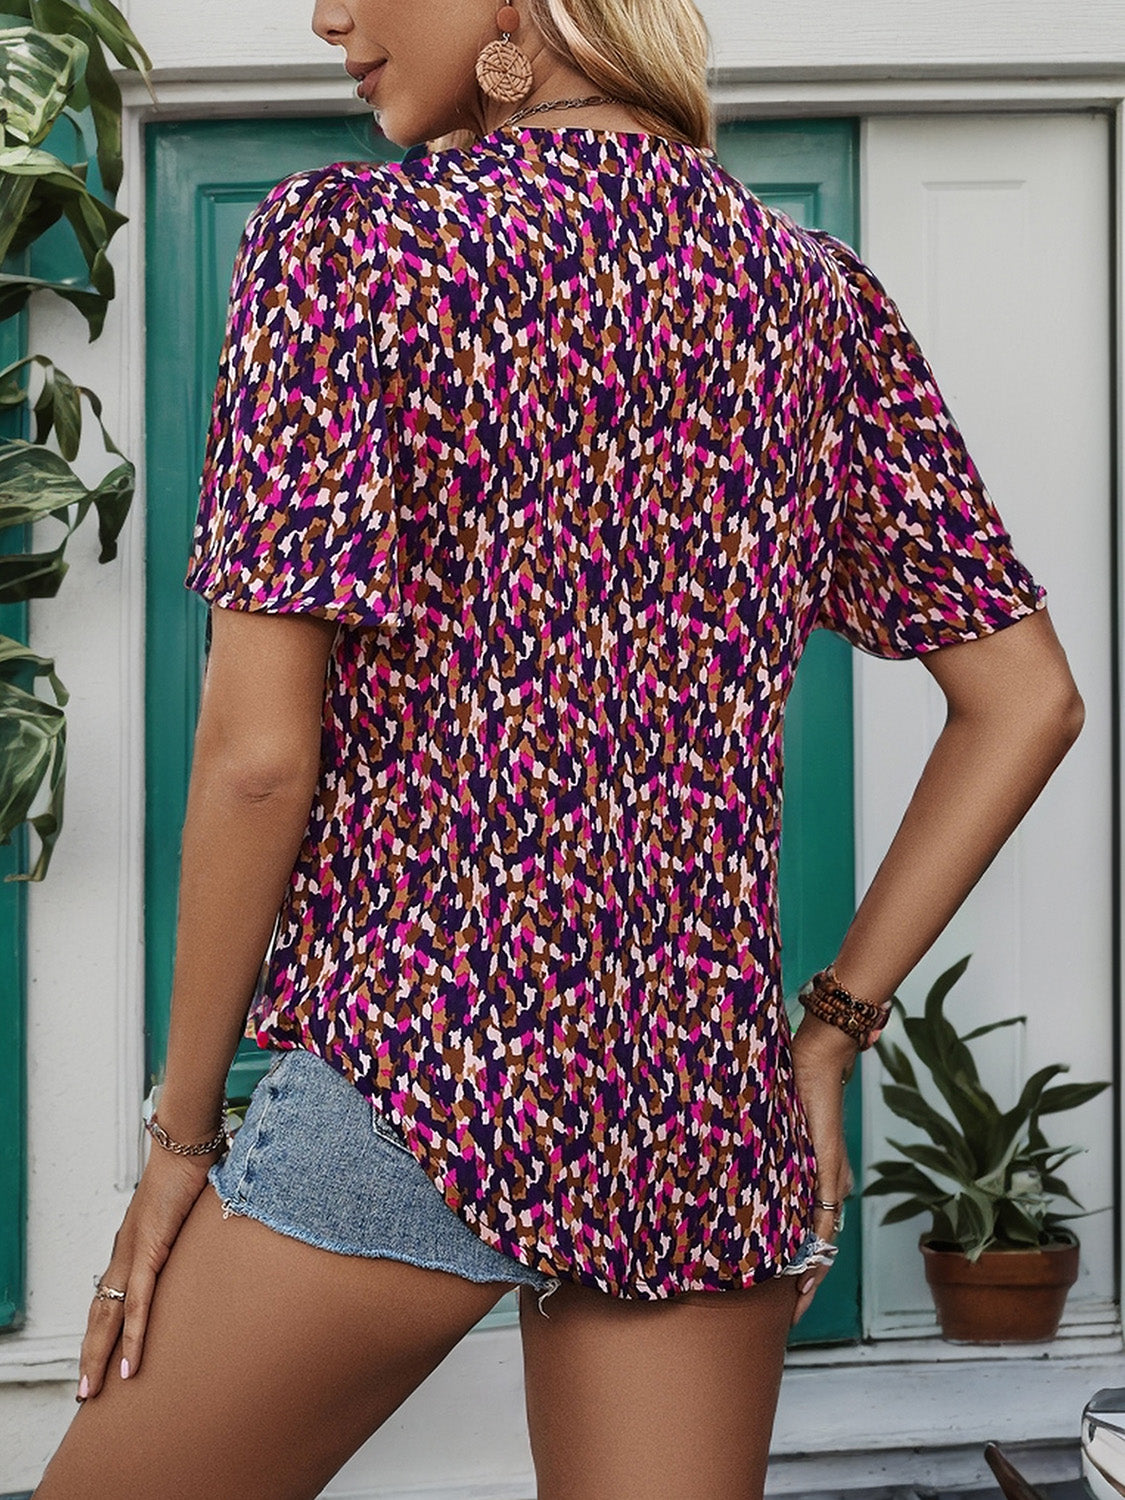 Lightweight, vibrant patterned blouse perfect for Southern fashion, styled with a woven belt and denim jeans